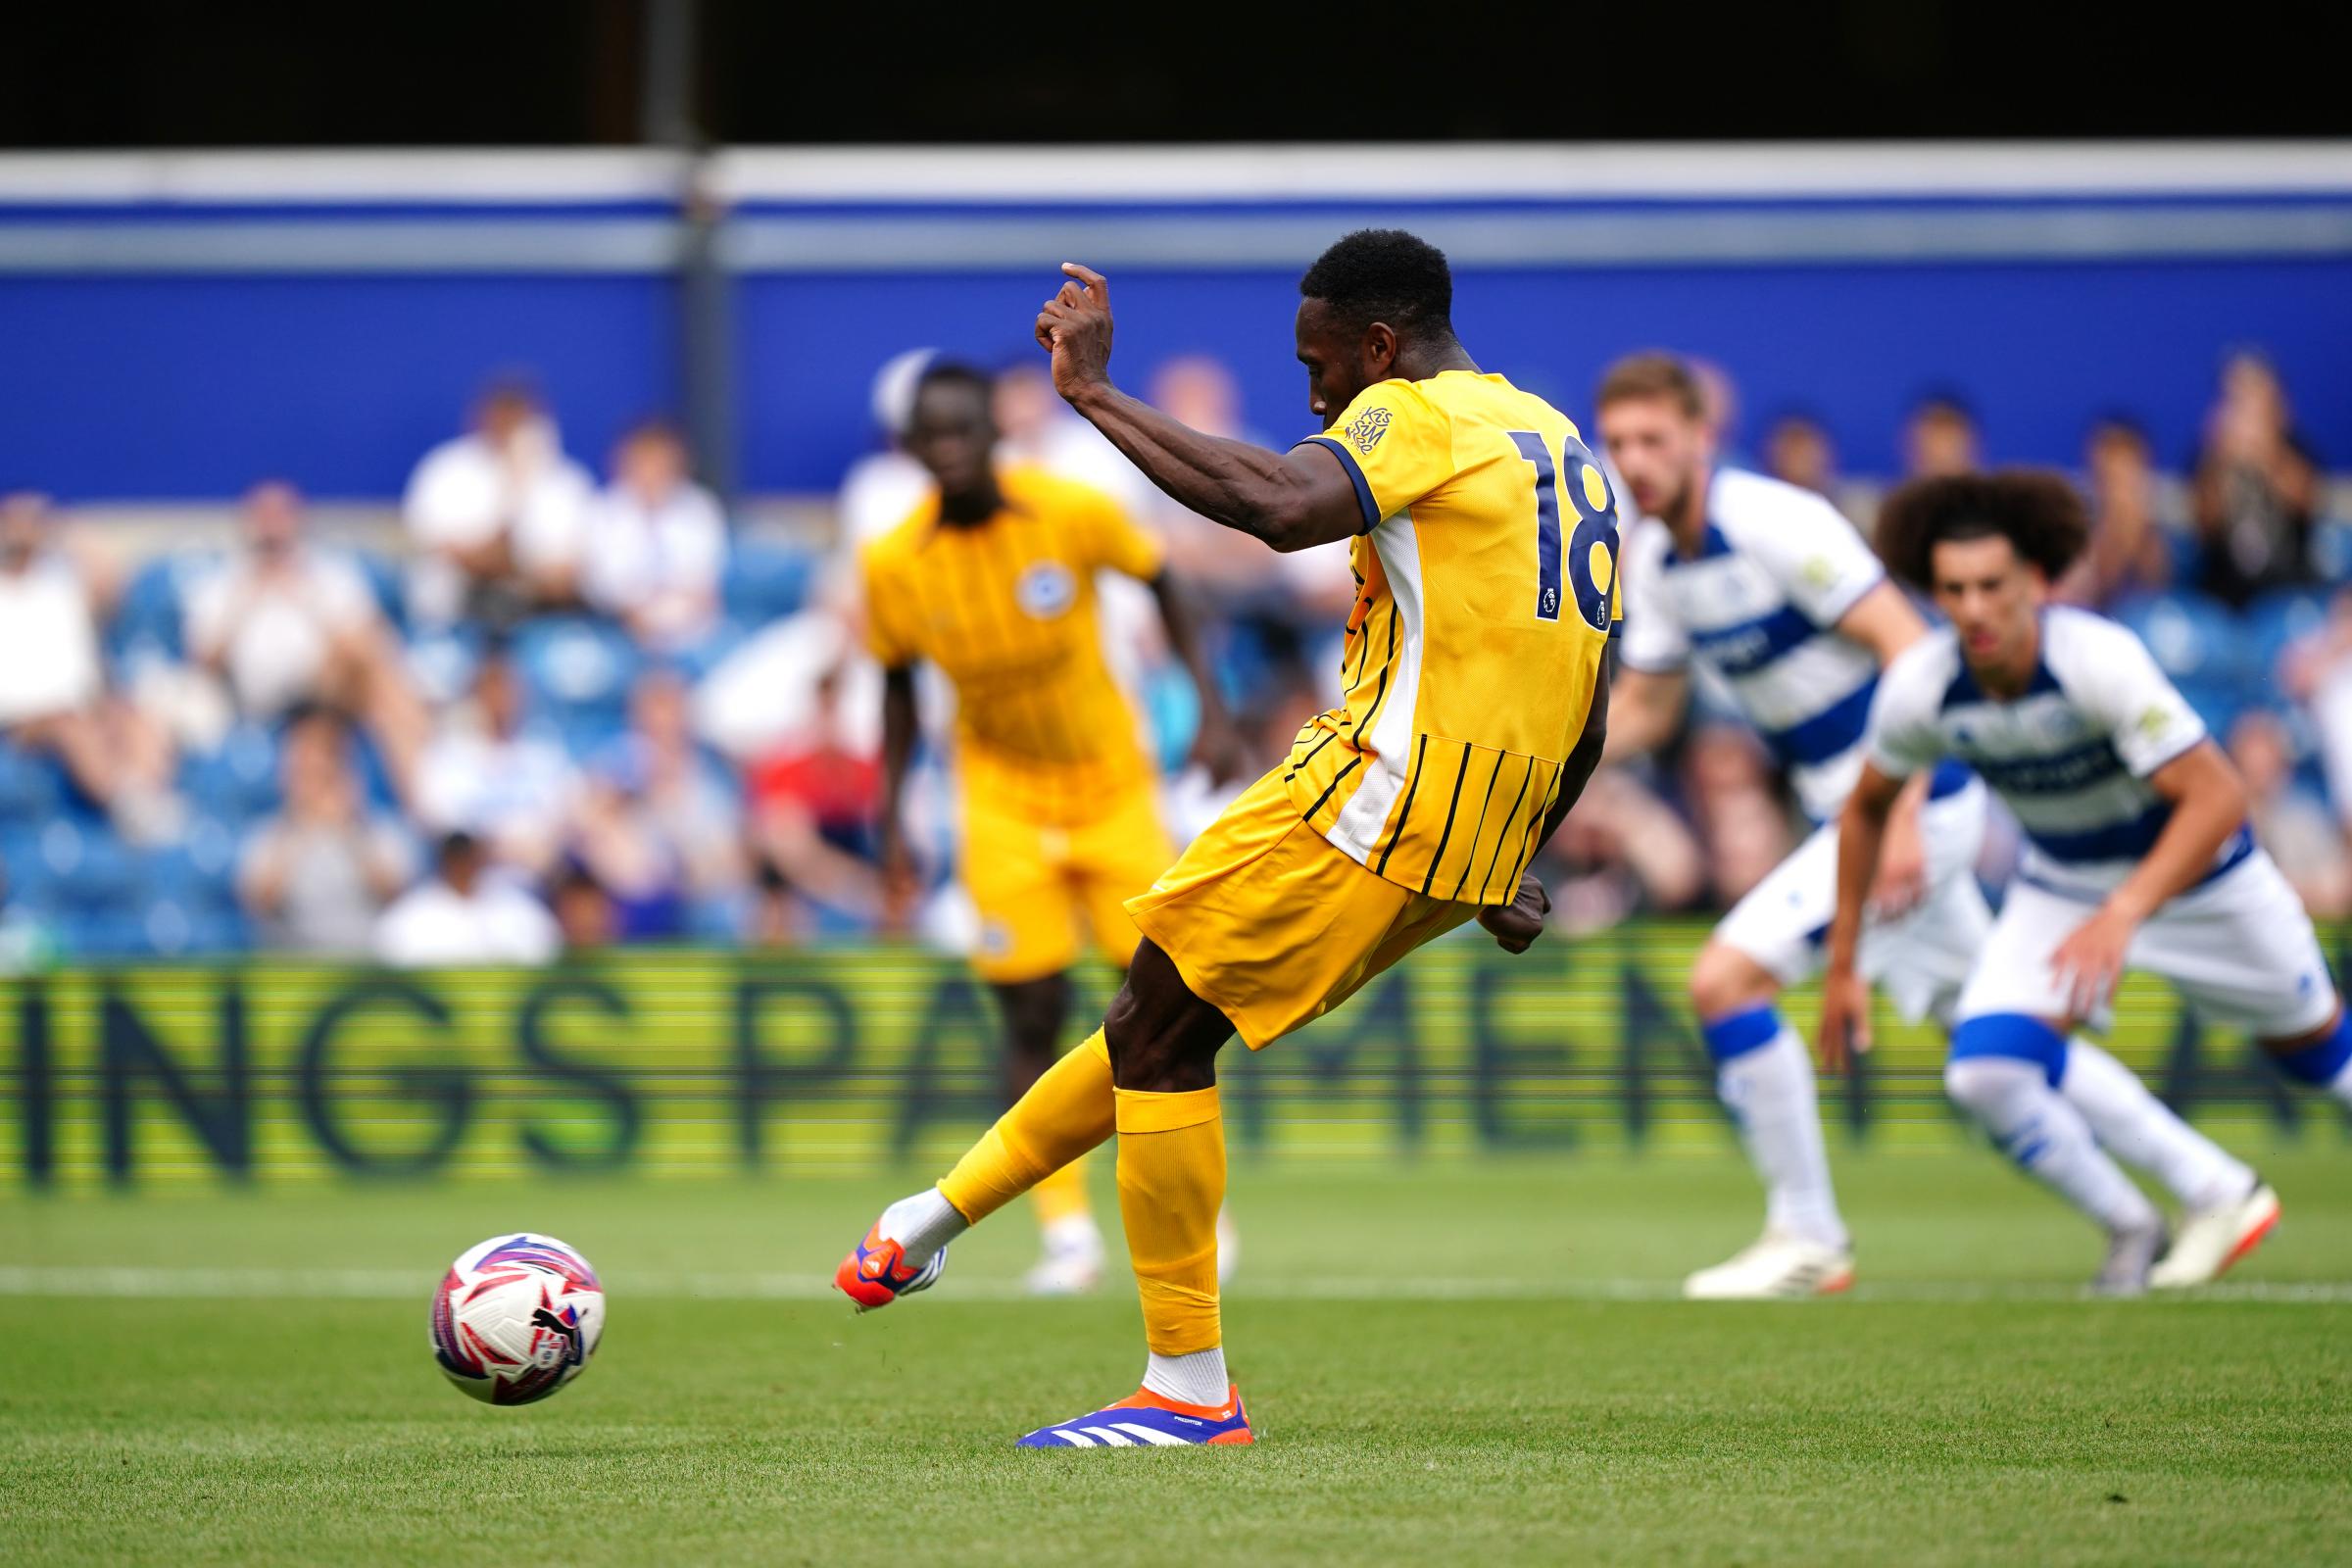 Danny Welbeck goal sees Brighton beat QPR as defence leads to attack